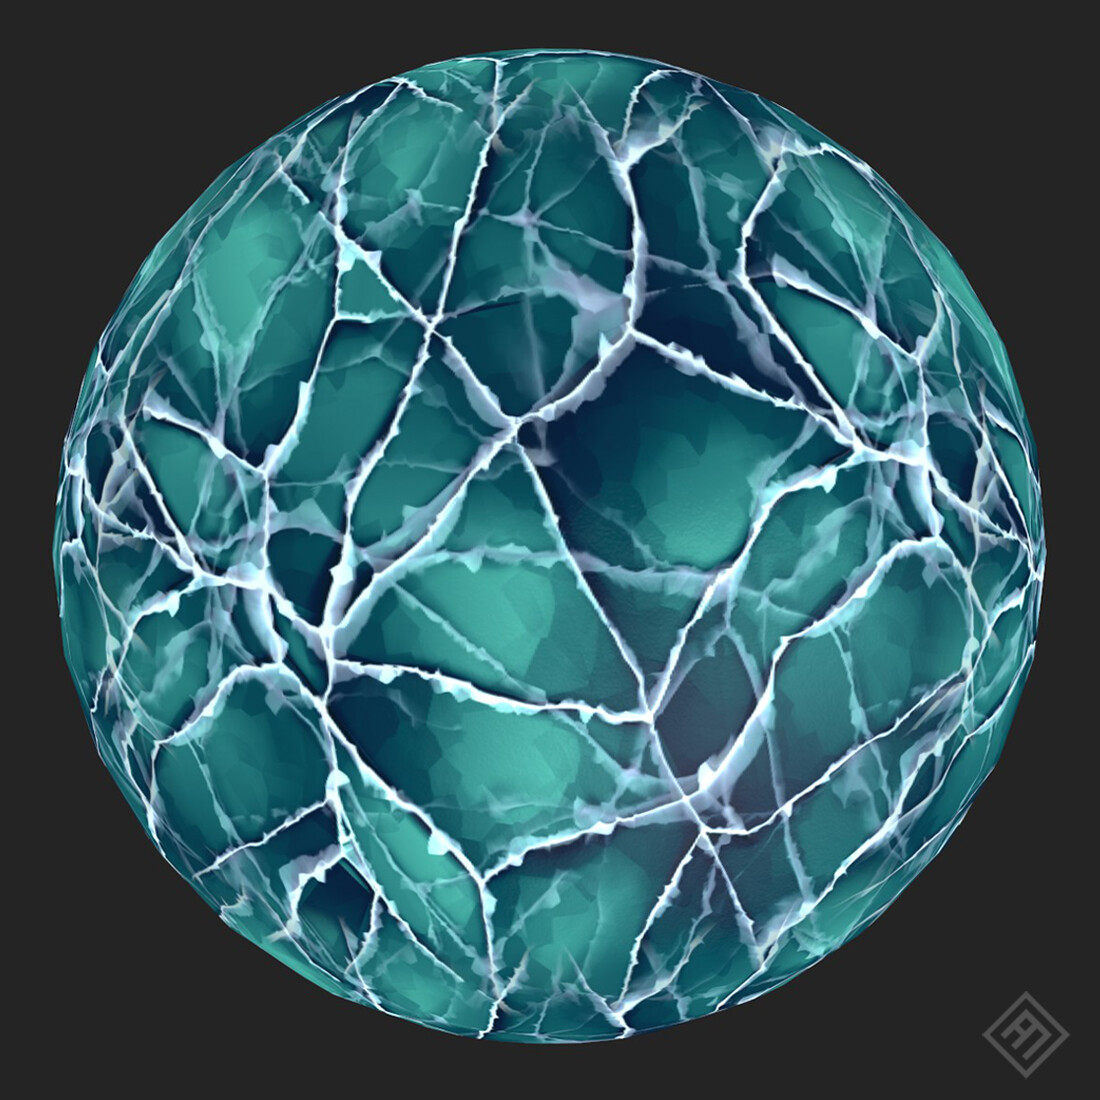 Render of the preset "Stylized Turquoise"